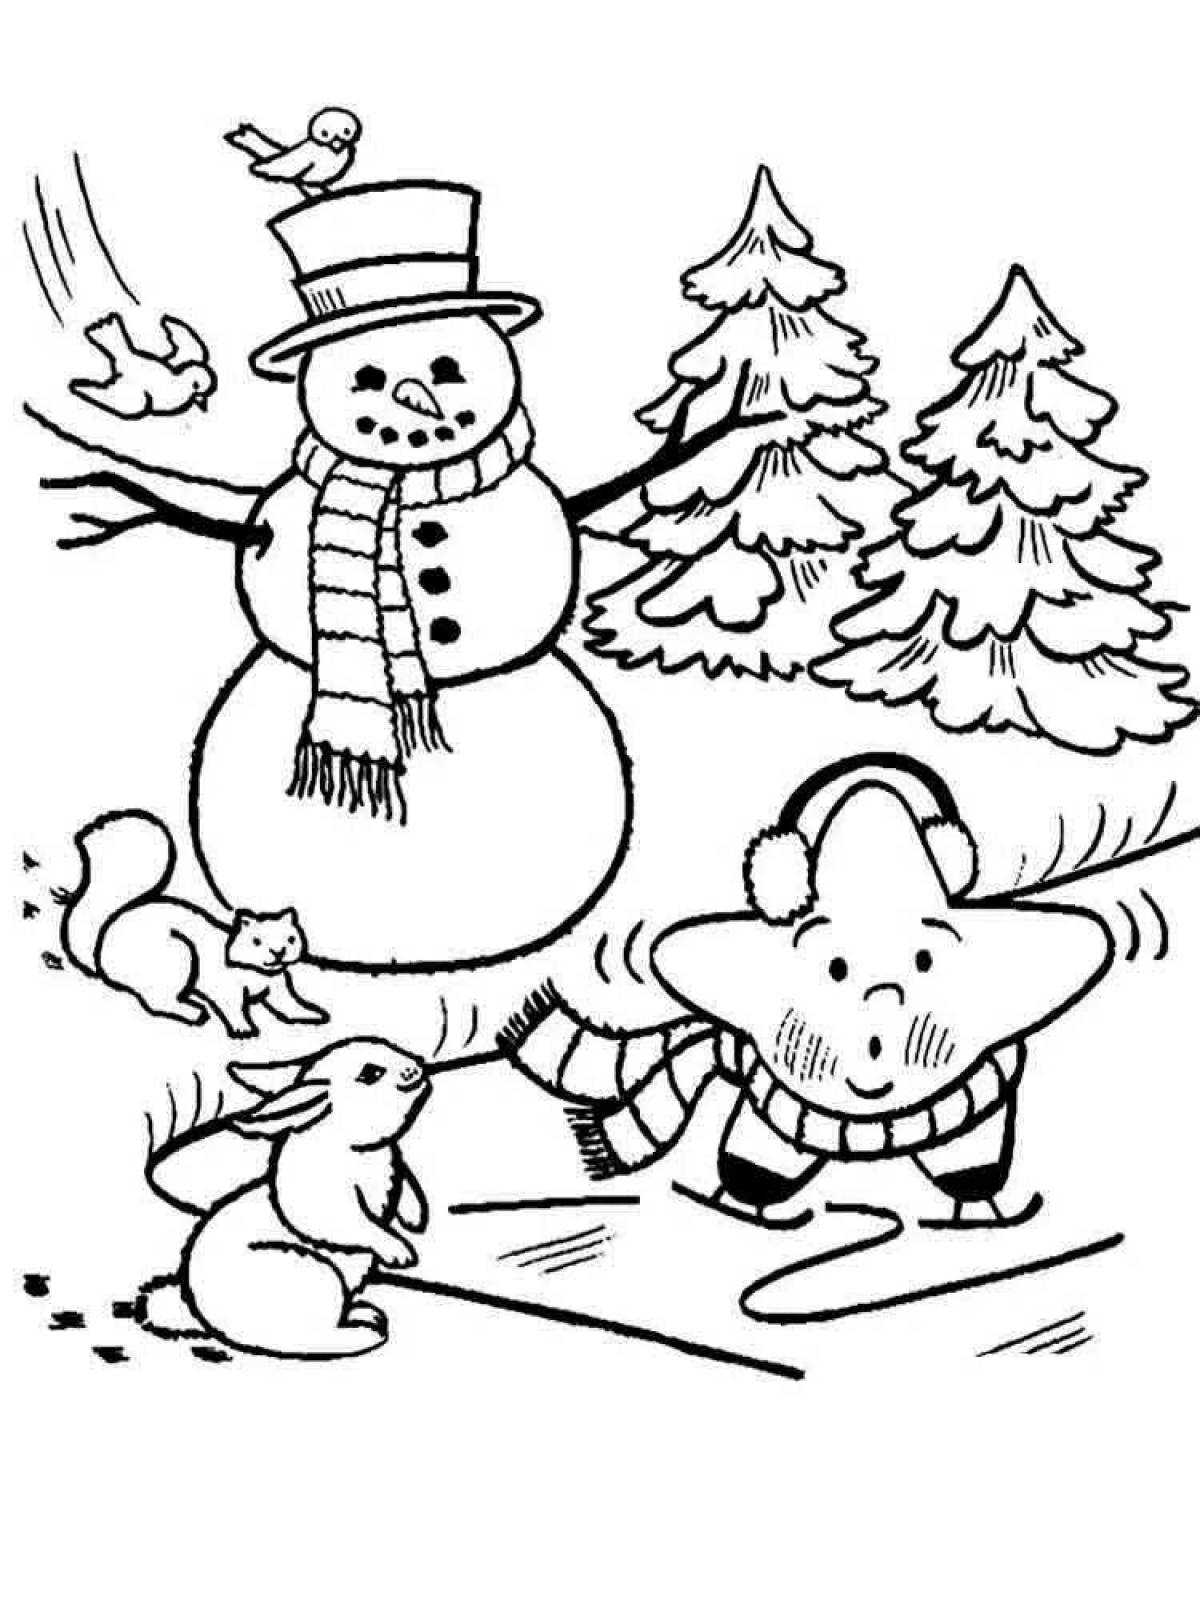 Color explosion rabbit and snowman coloring book